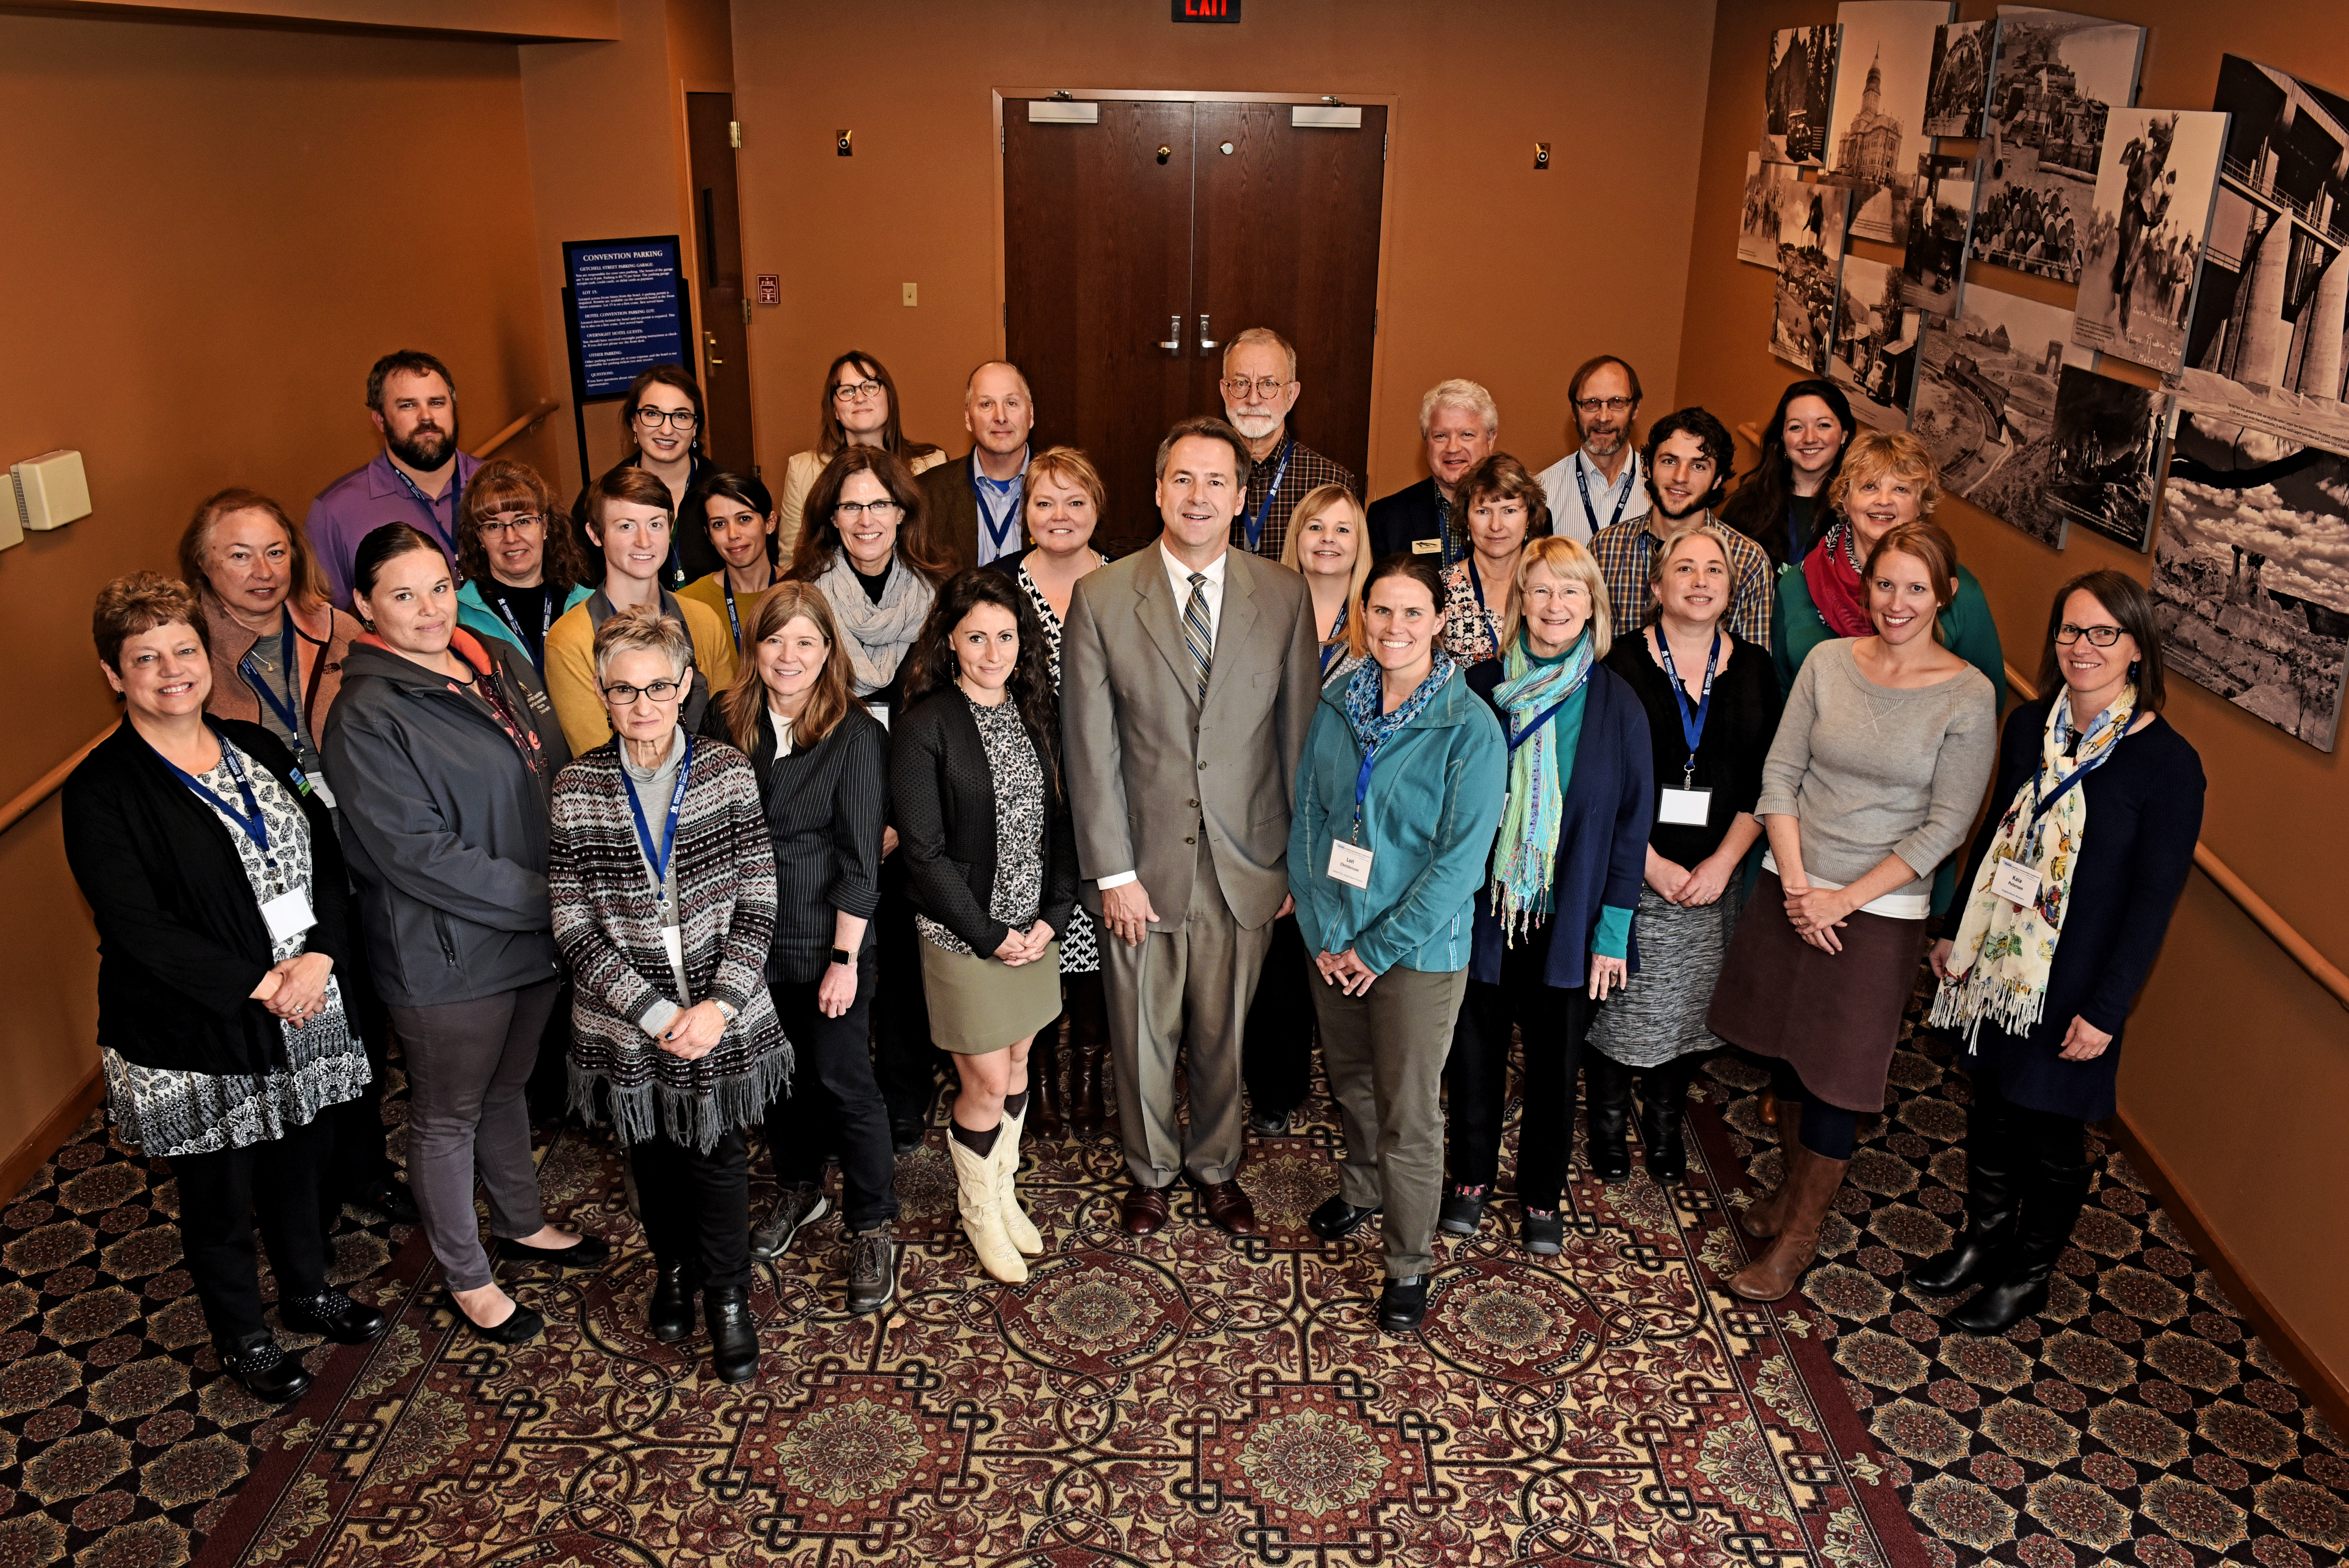 Montana Governor Steve Bullock and 'What Works in Montana' project presenters